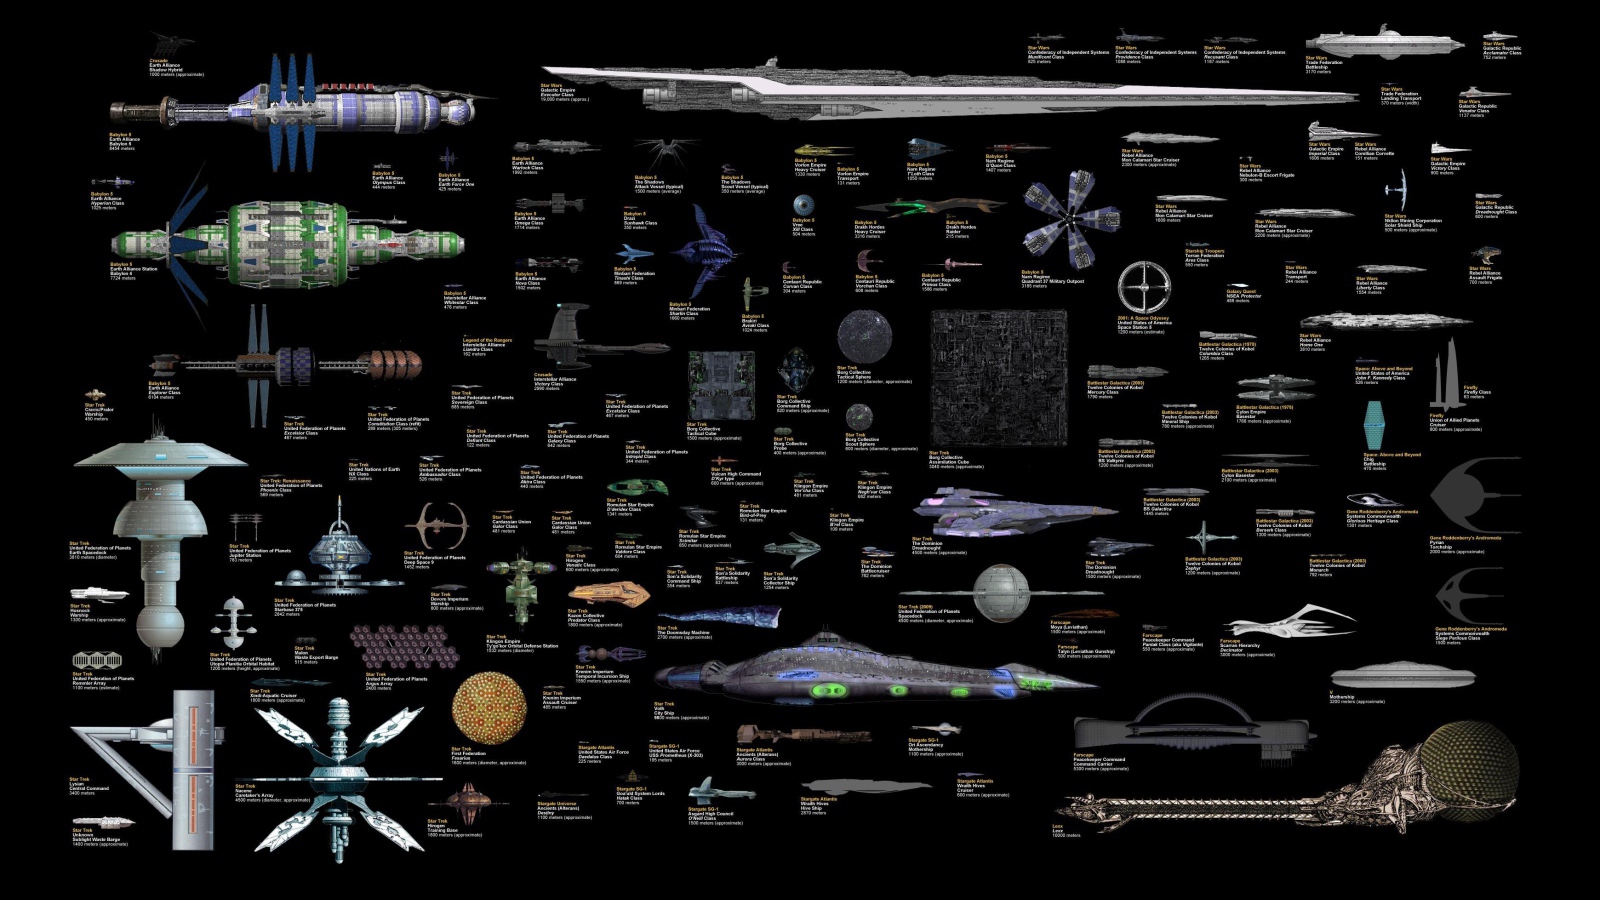 Spaceships from various science fiction series